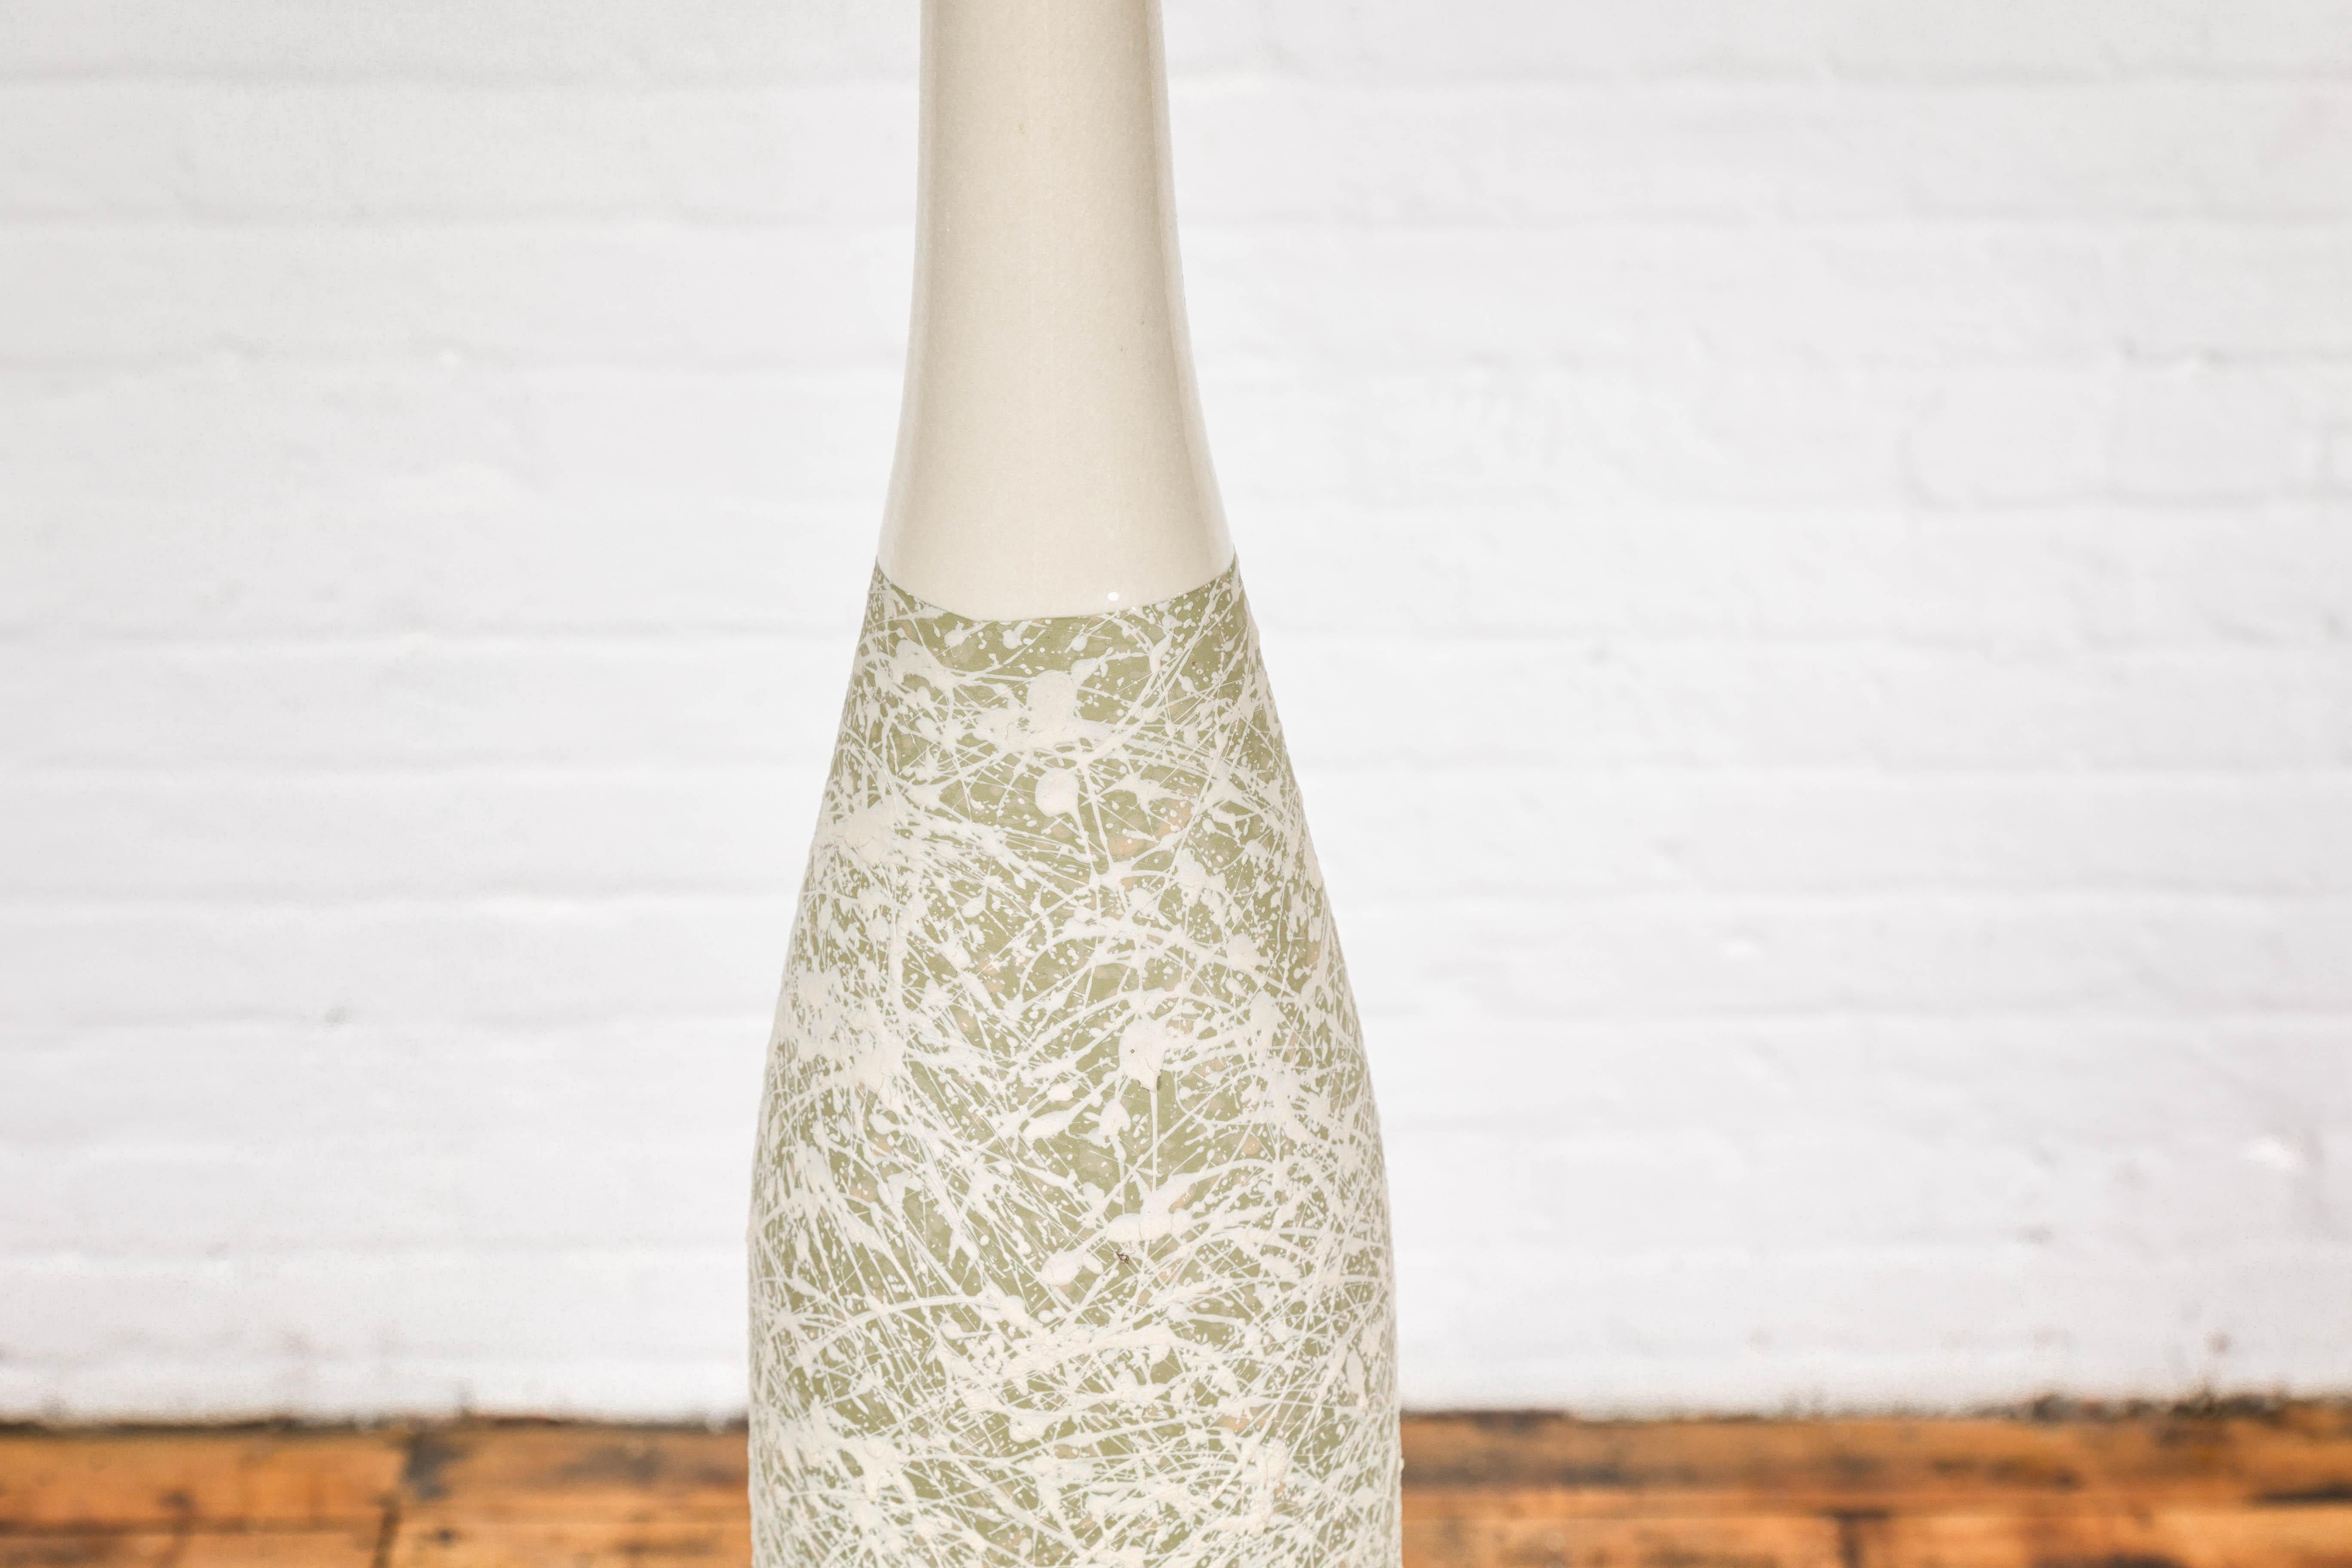 Soft Green and Cream Artisan Ceramic Vase with Energetic Dripping Décor For Sale 1